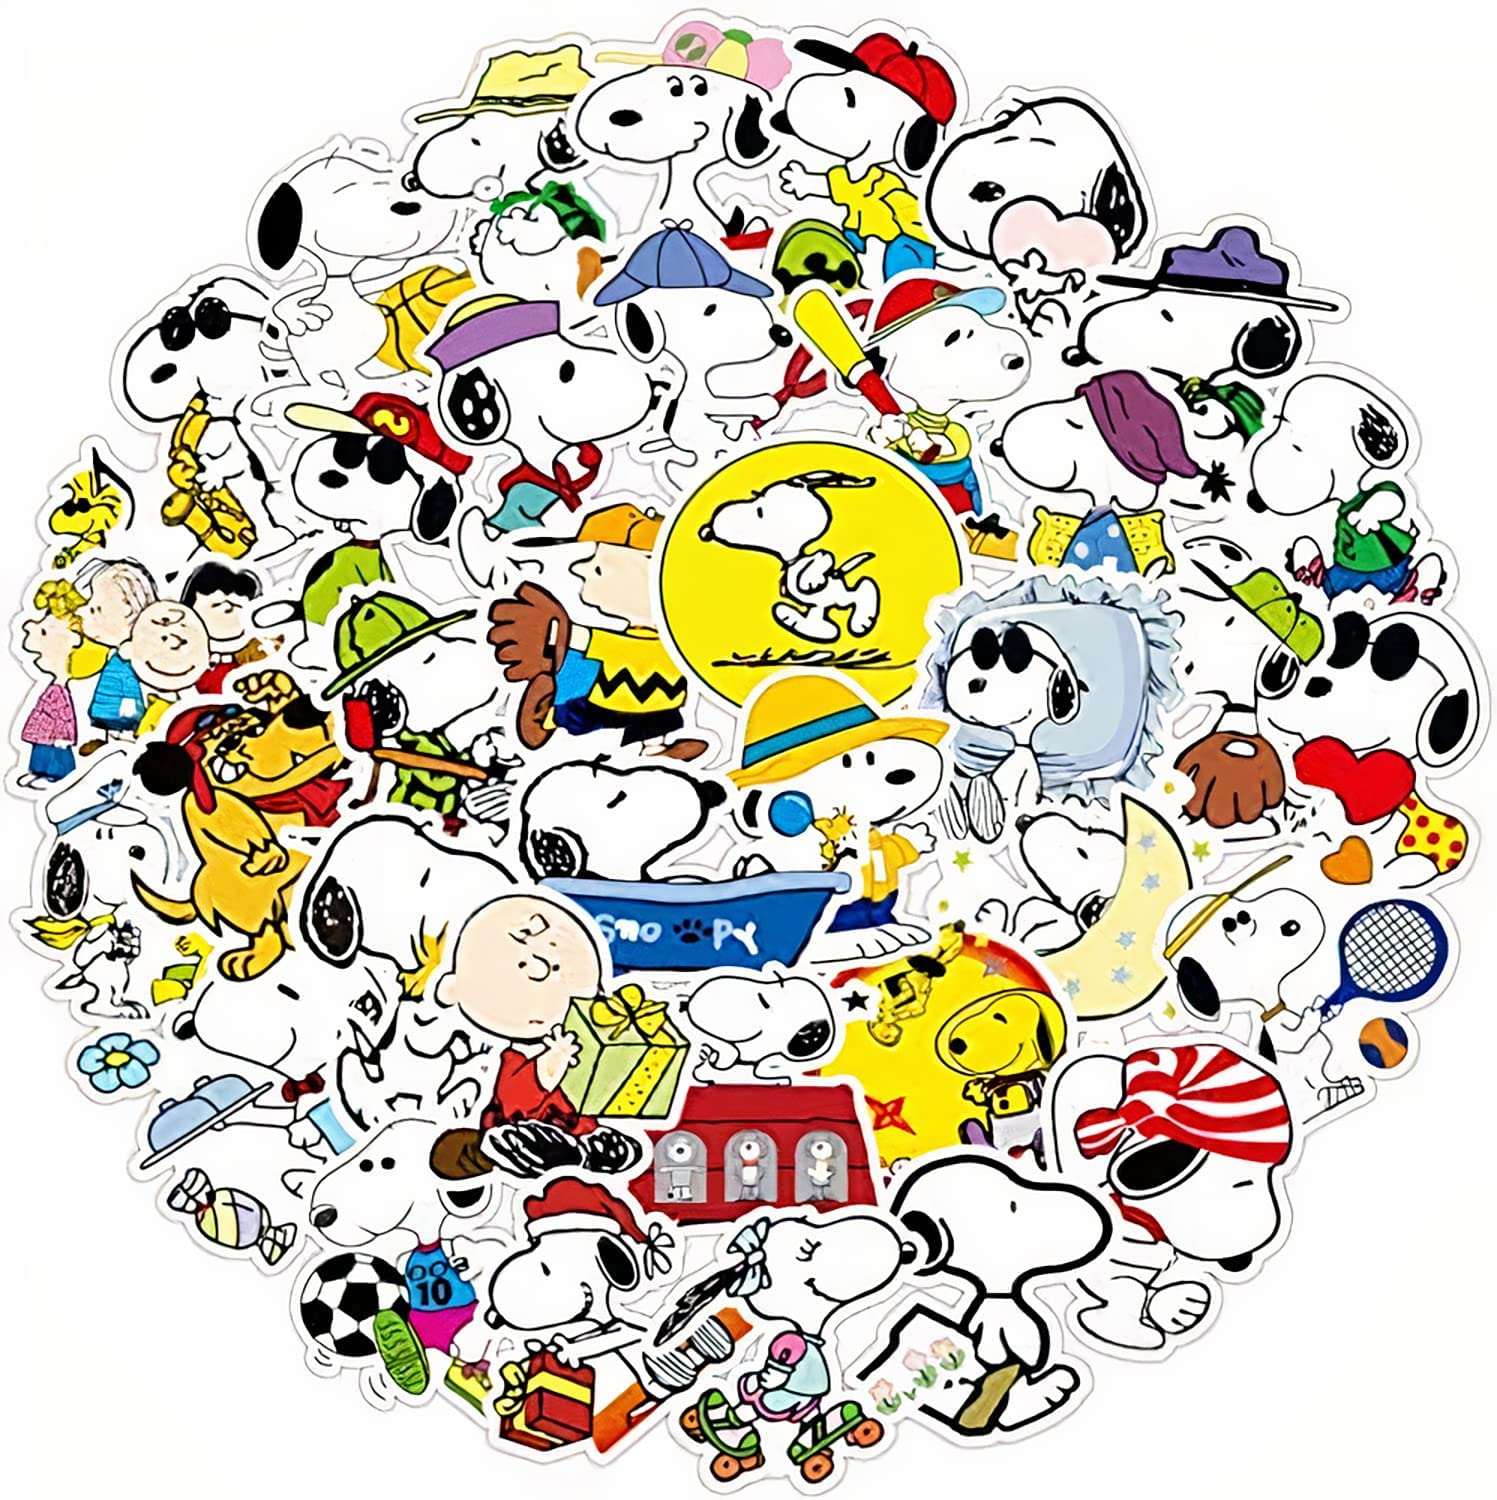 Cute Snoopy And Friends Stickers is the best way to keep your and your  friend's friendship.